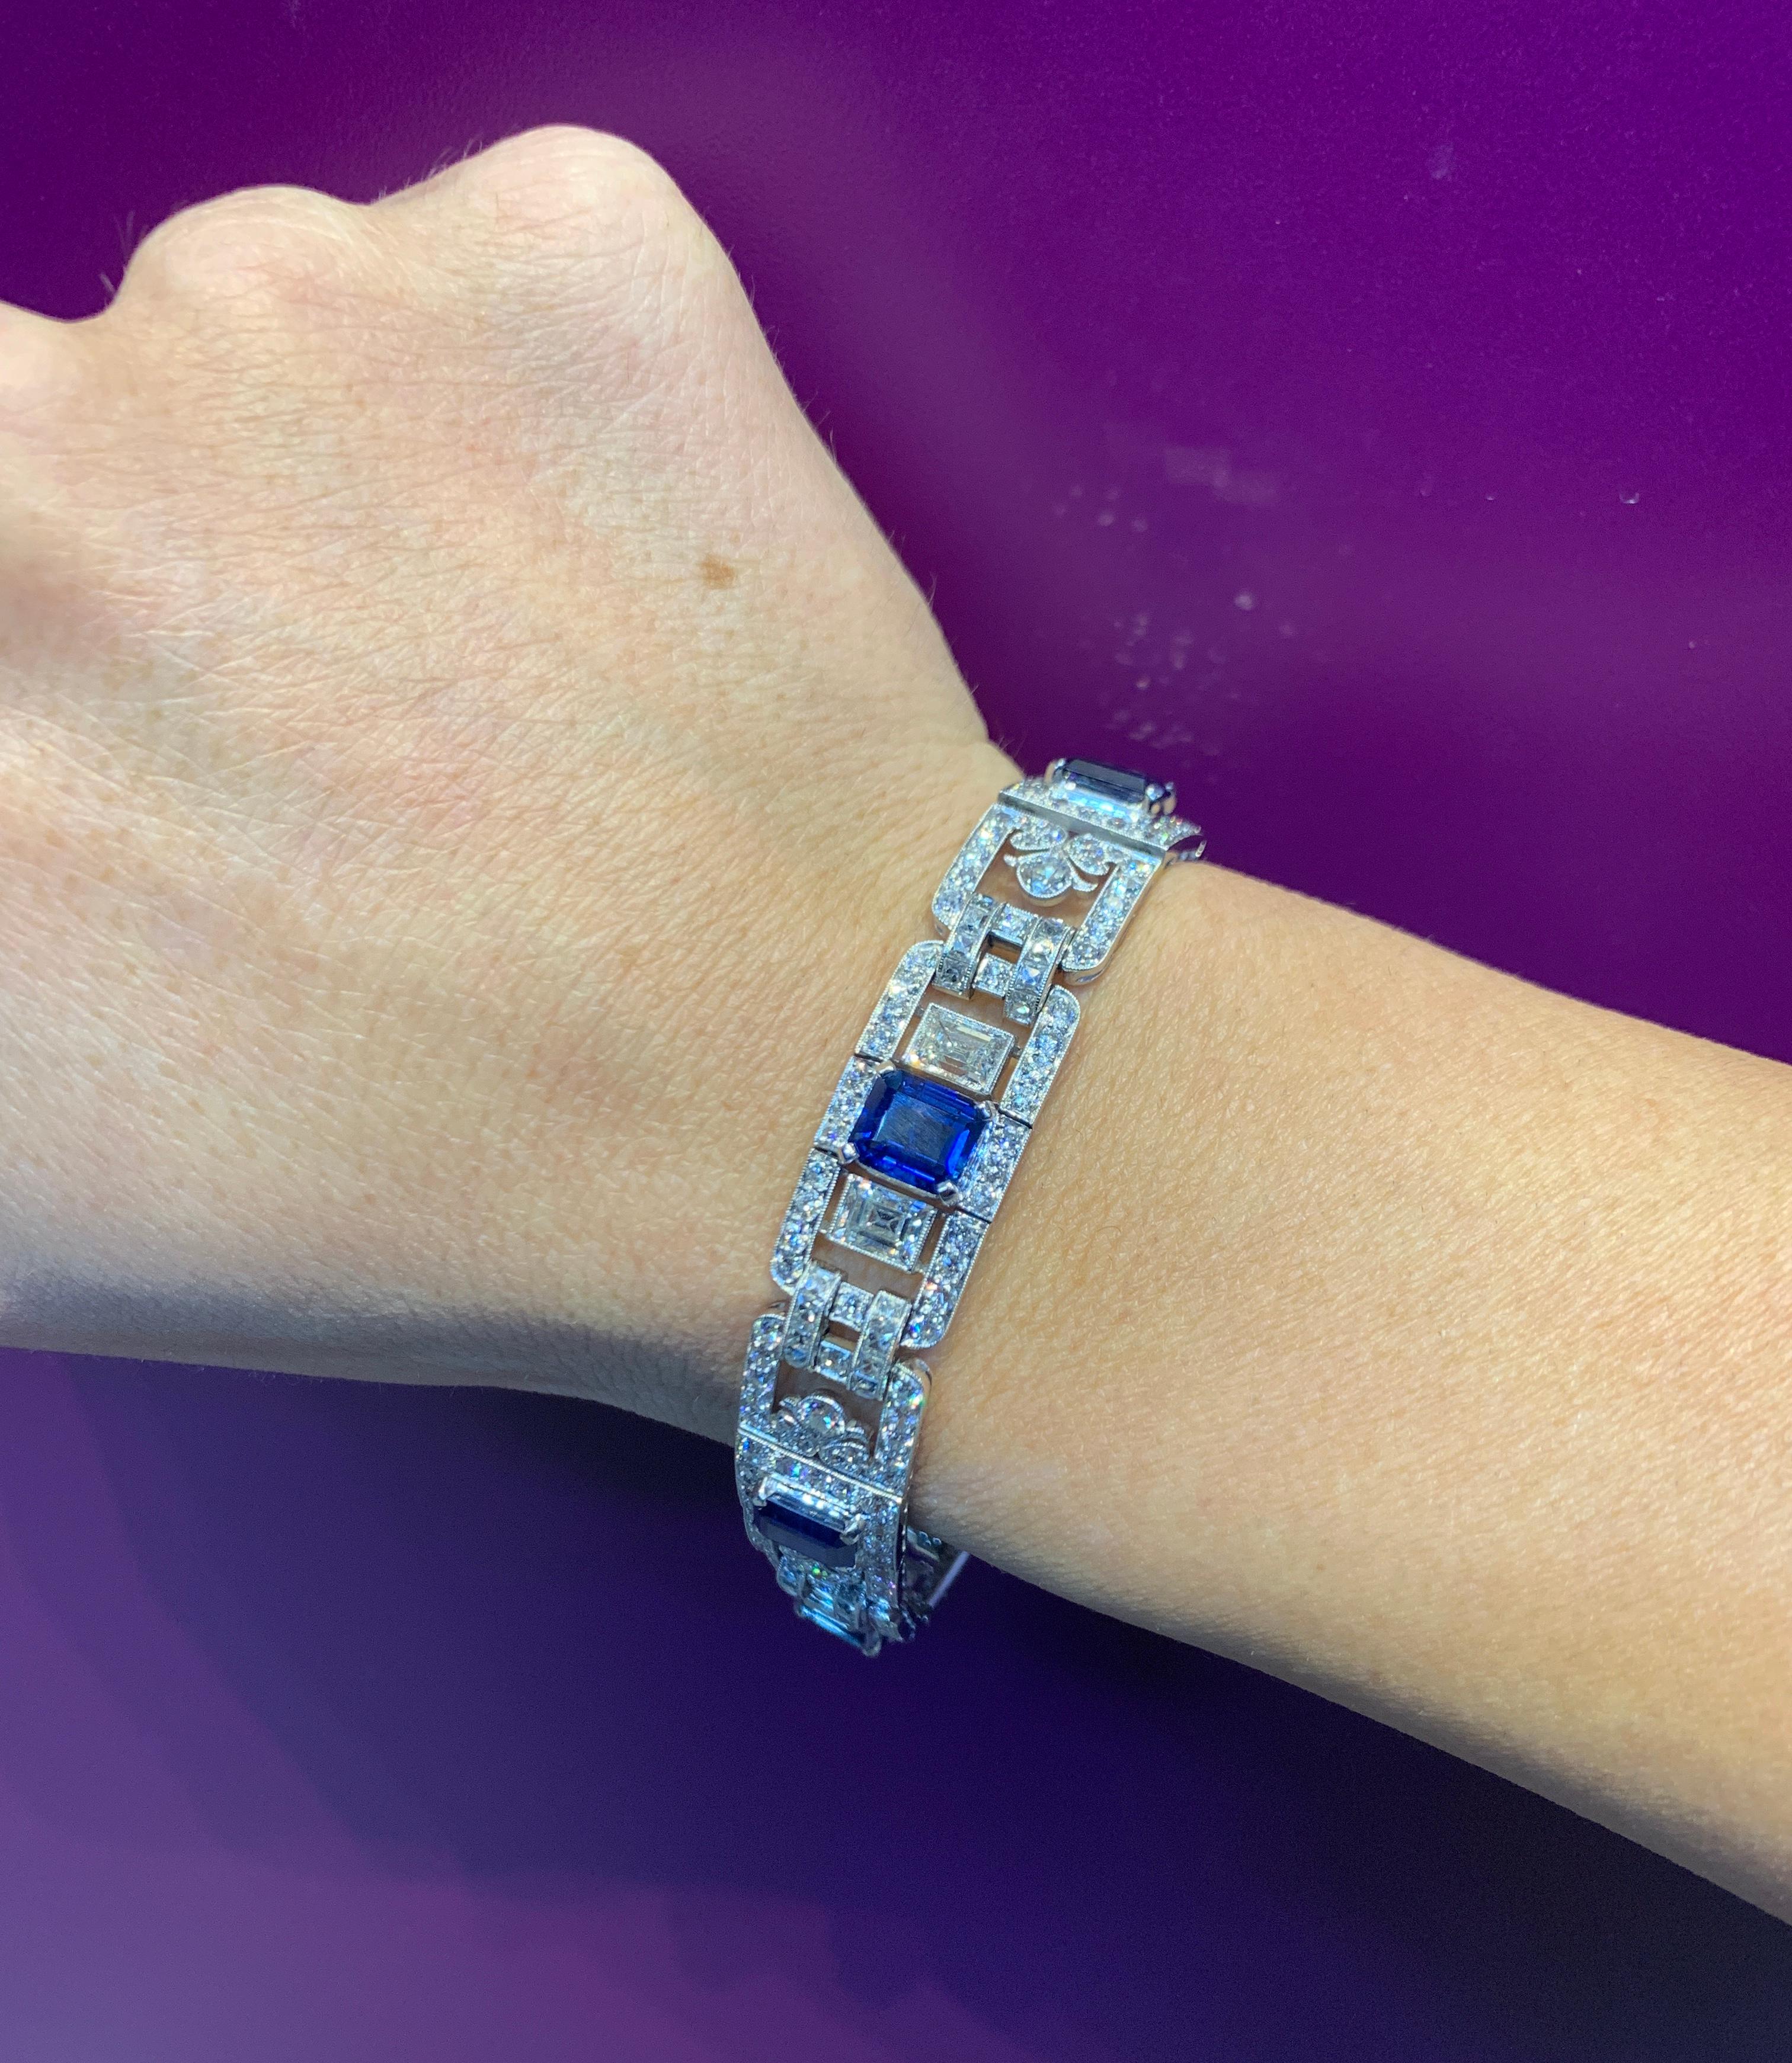 Art Deco Sapphire and Diamond Bracelet by Tiffany and Co
With a AGL Certificate stating five of the sapphires and Burmese with no heat treatment
Very Great Gatsby Style
Made Circa 1920
Measurements: 7